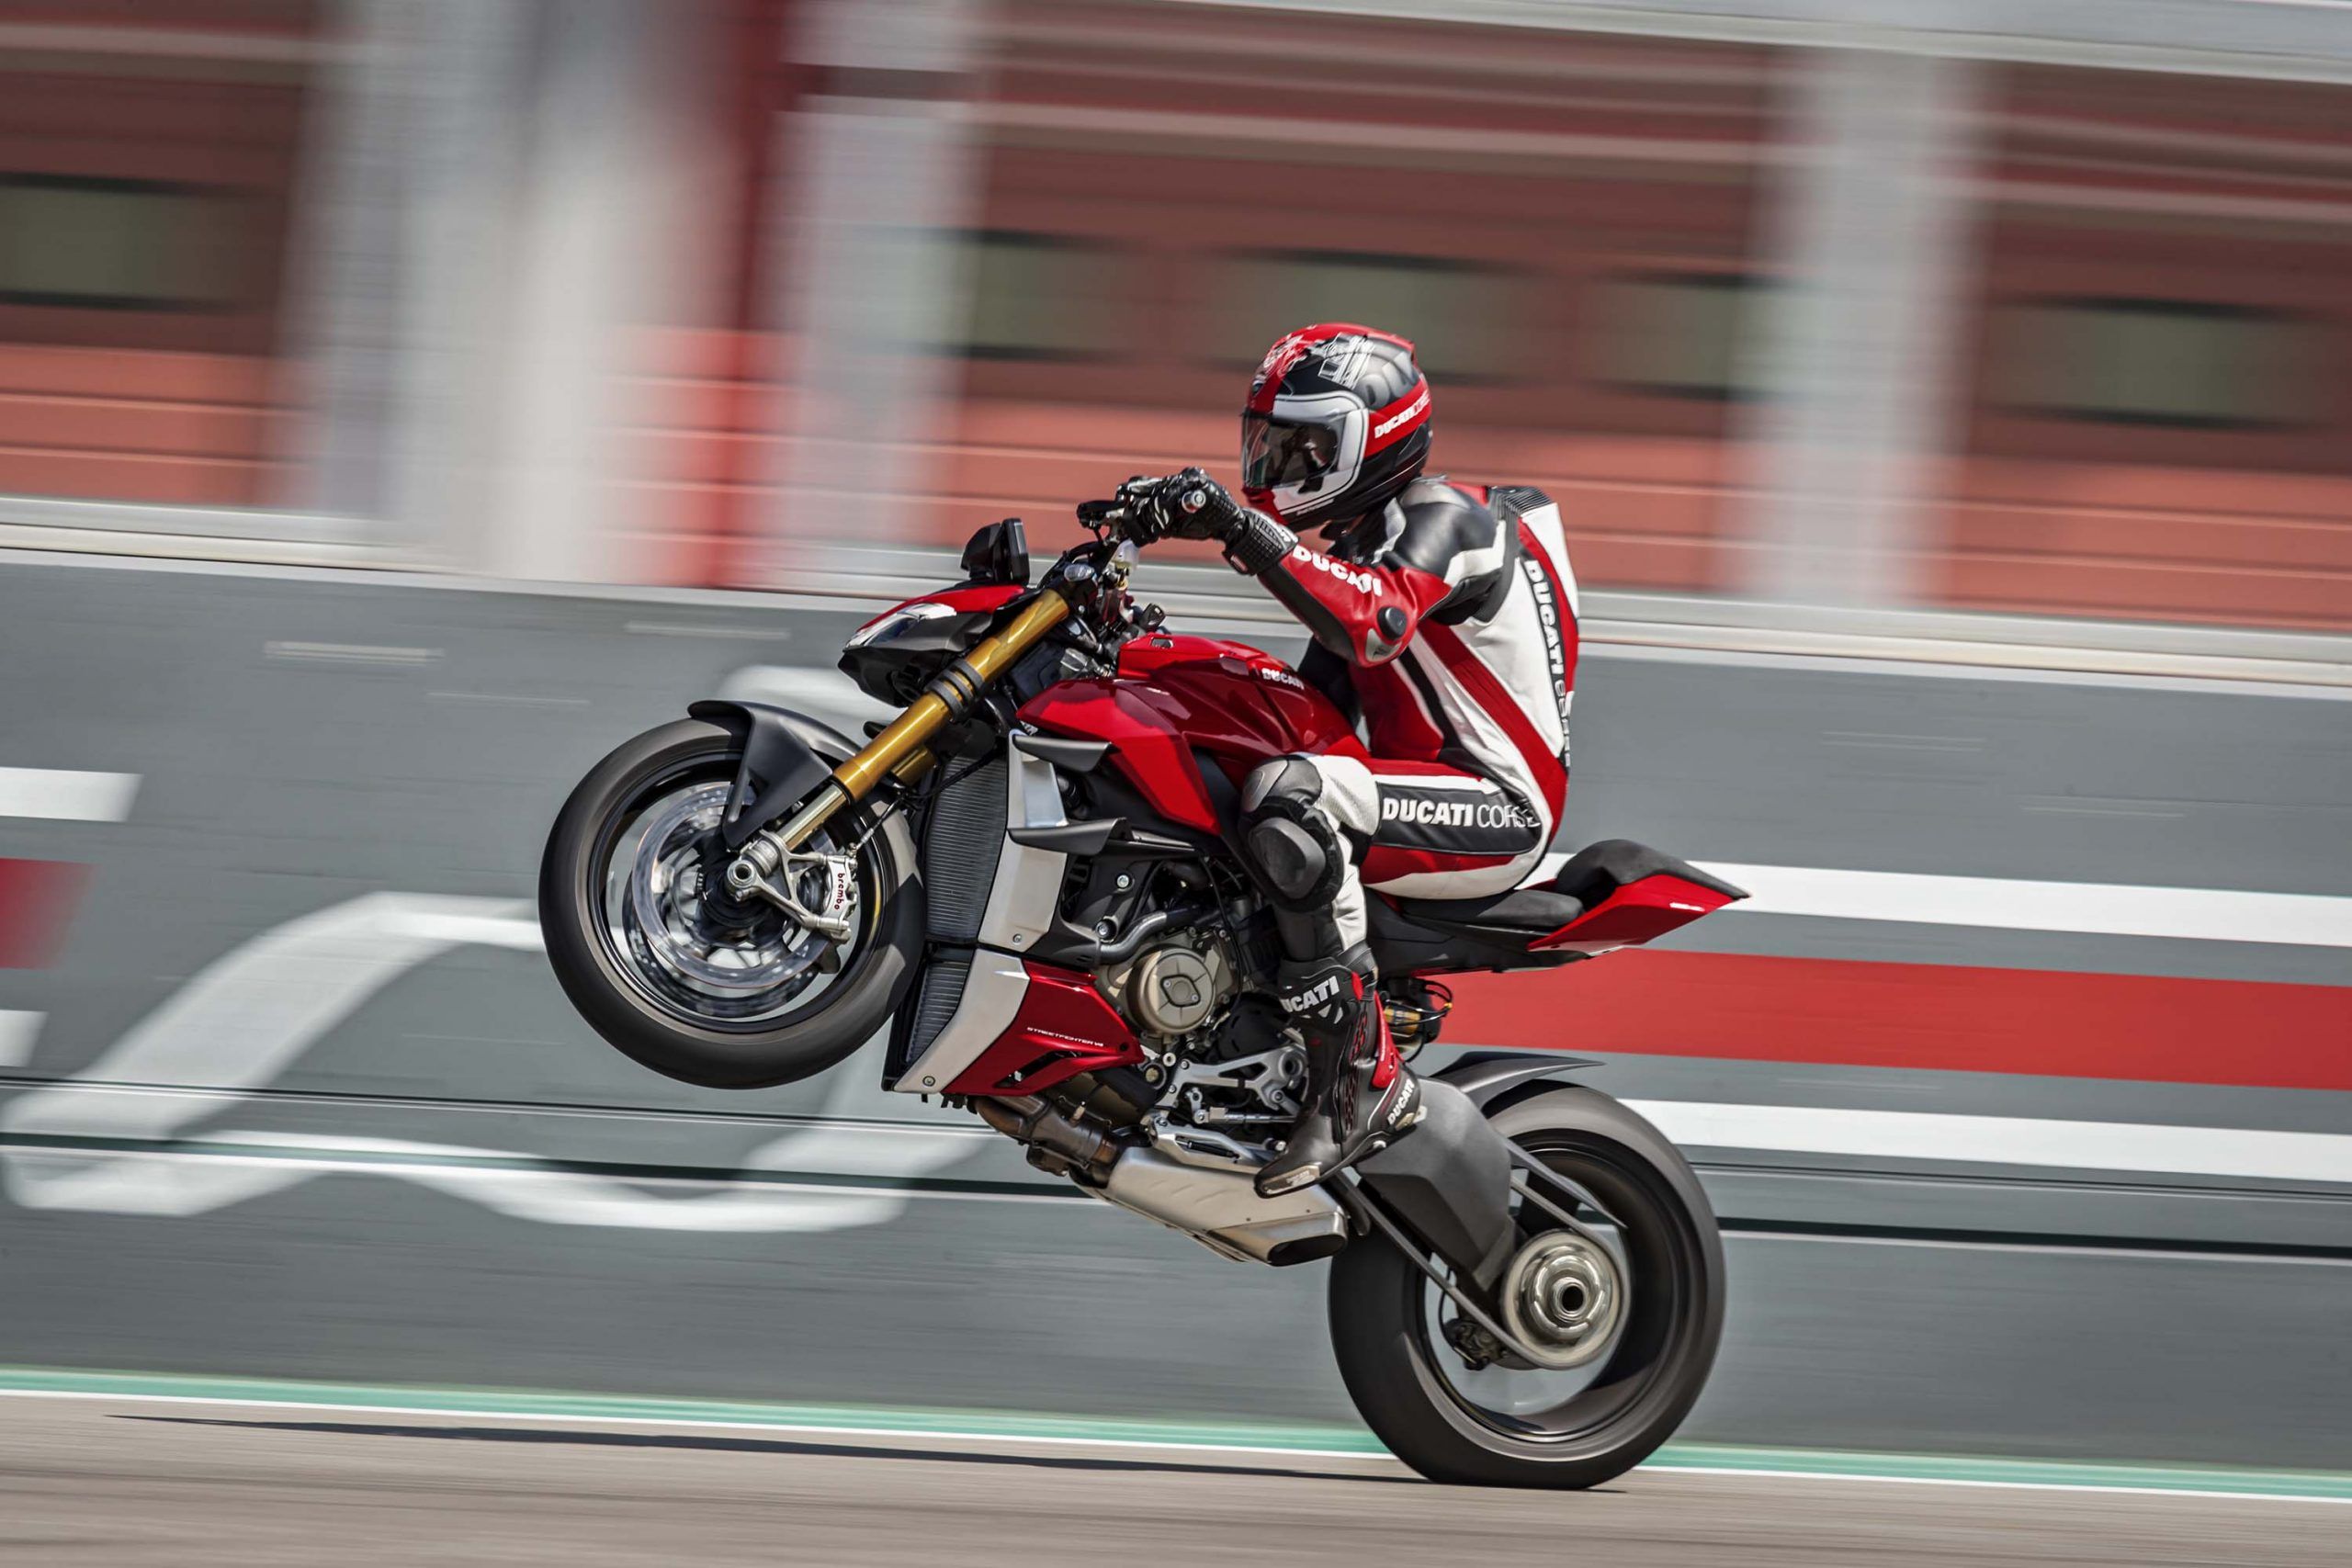 Even More Photo of the Ducati Streetfighter V4 & Rubber